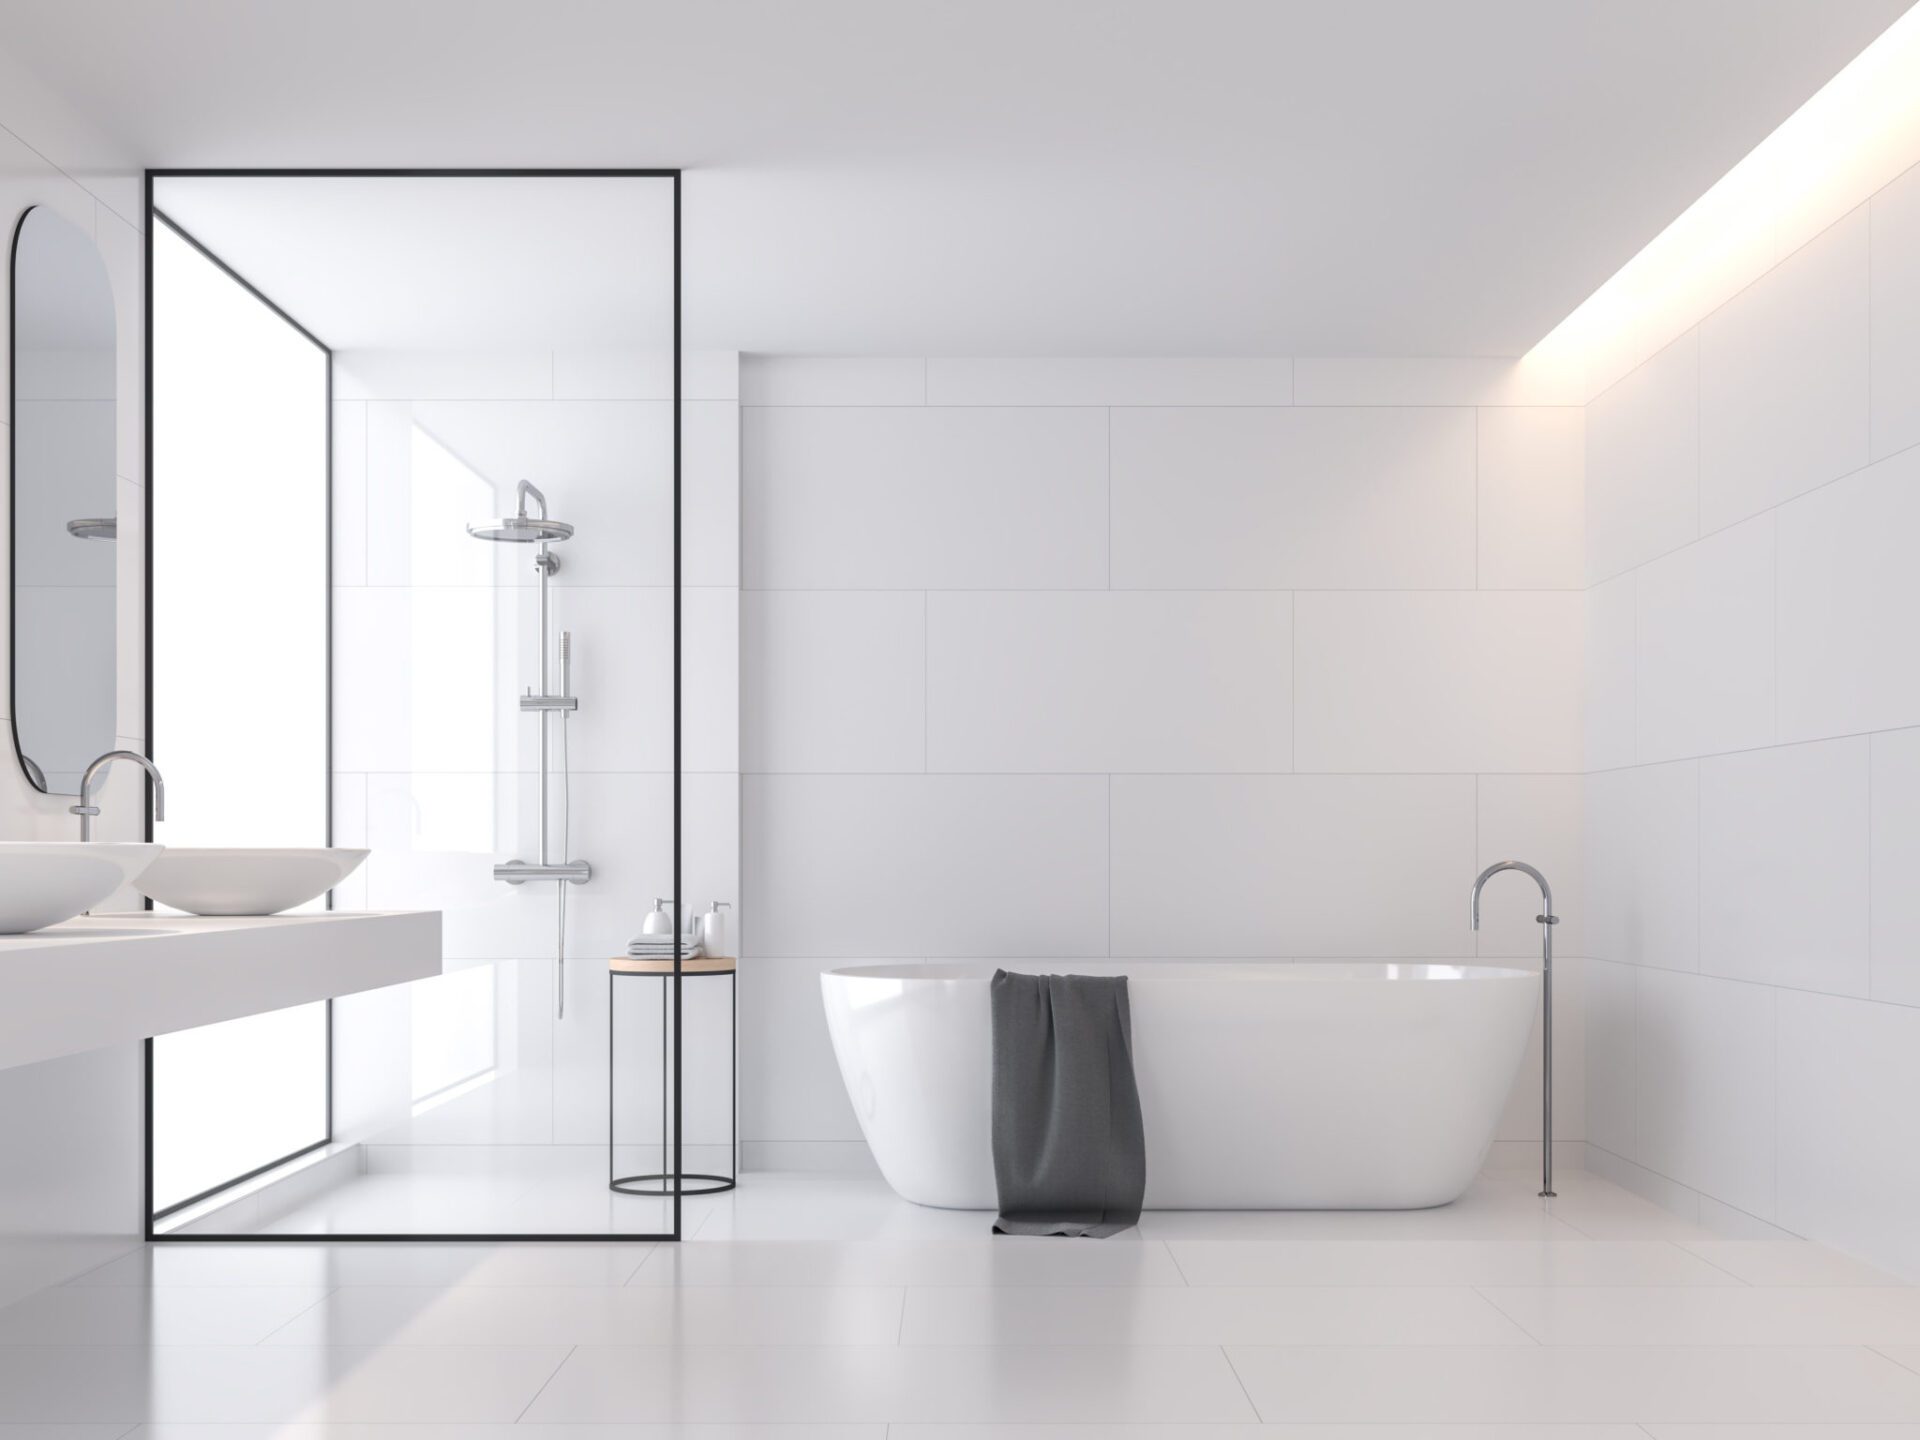 Sustainability update – the latest water-efficient bathroom products